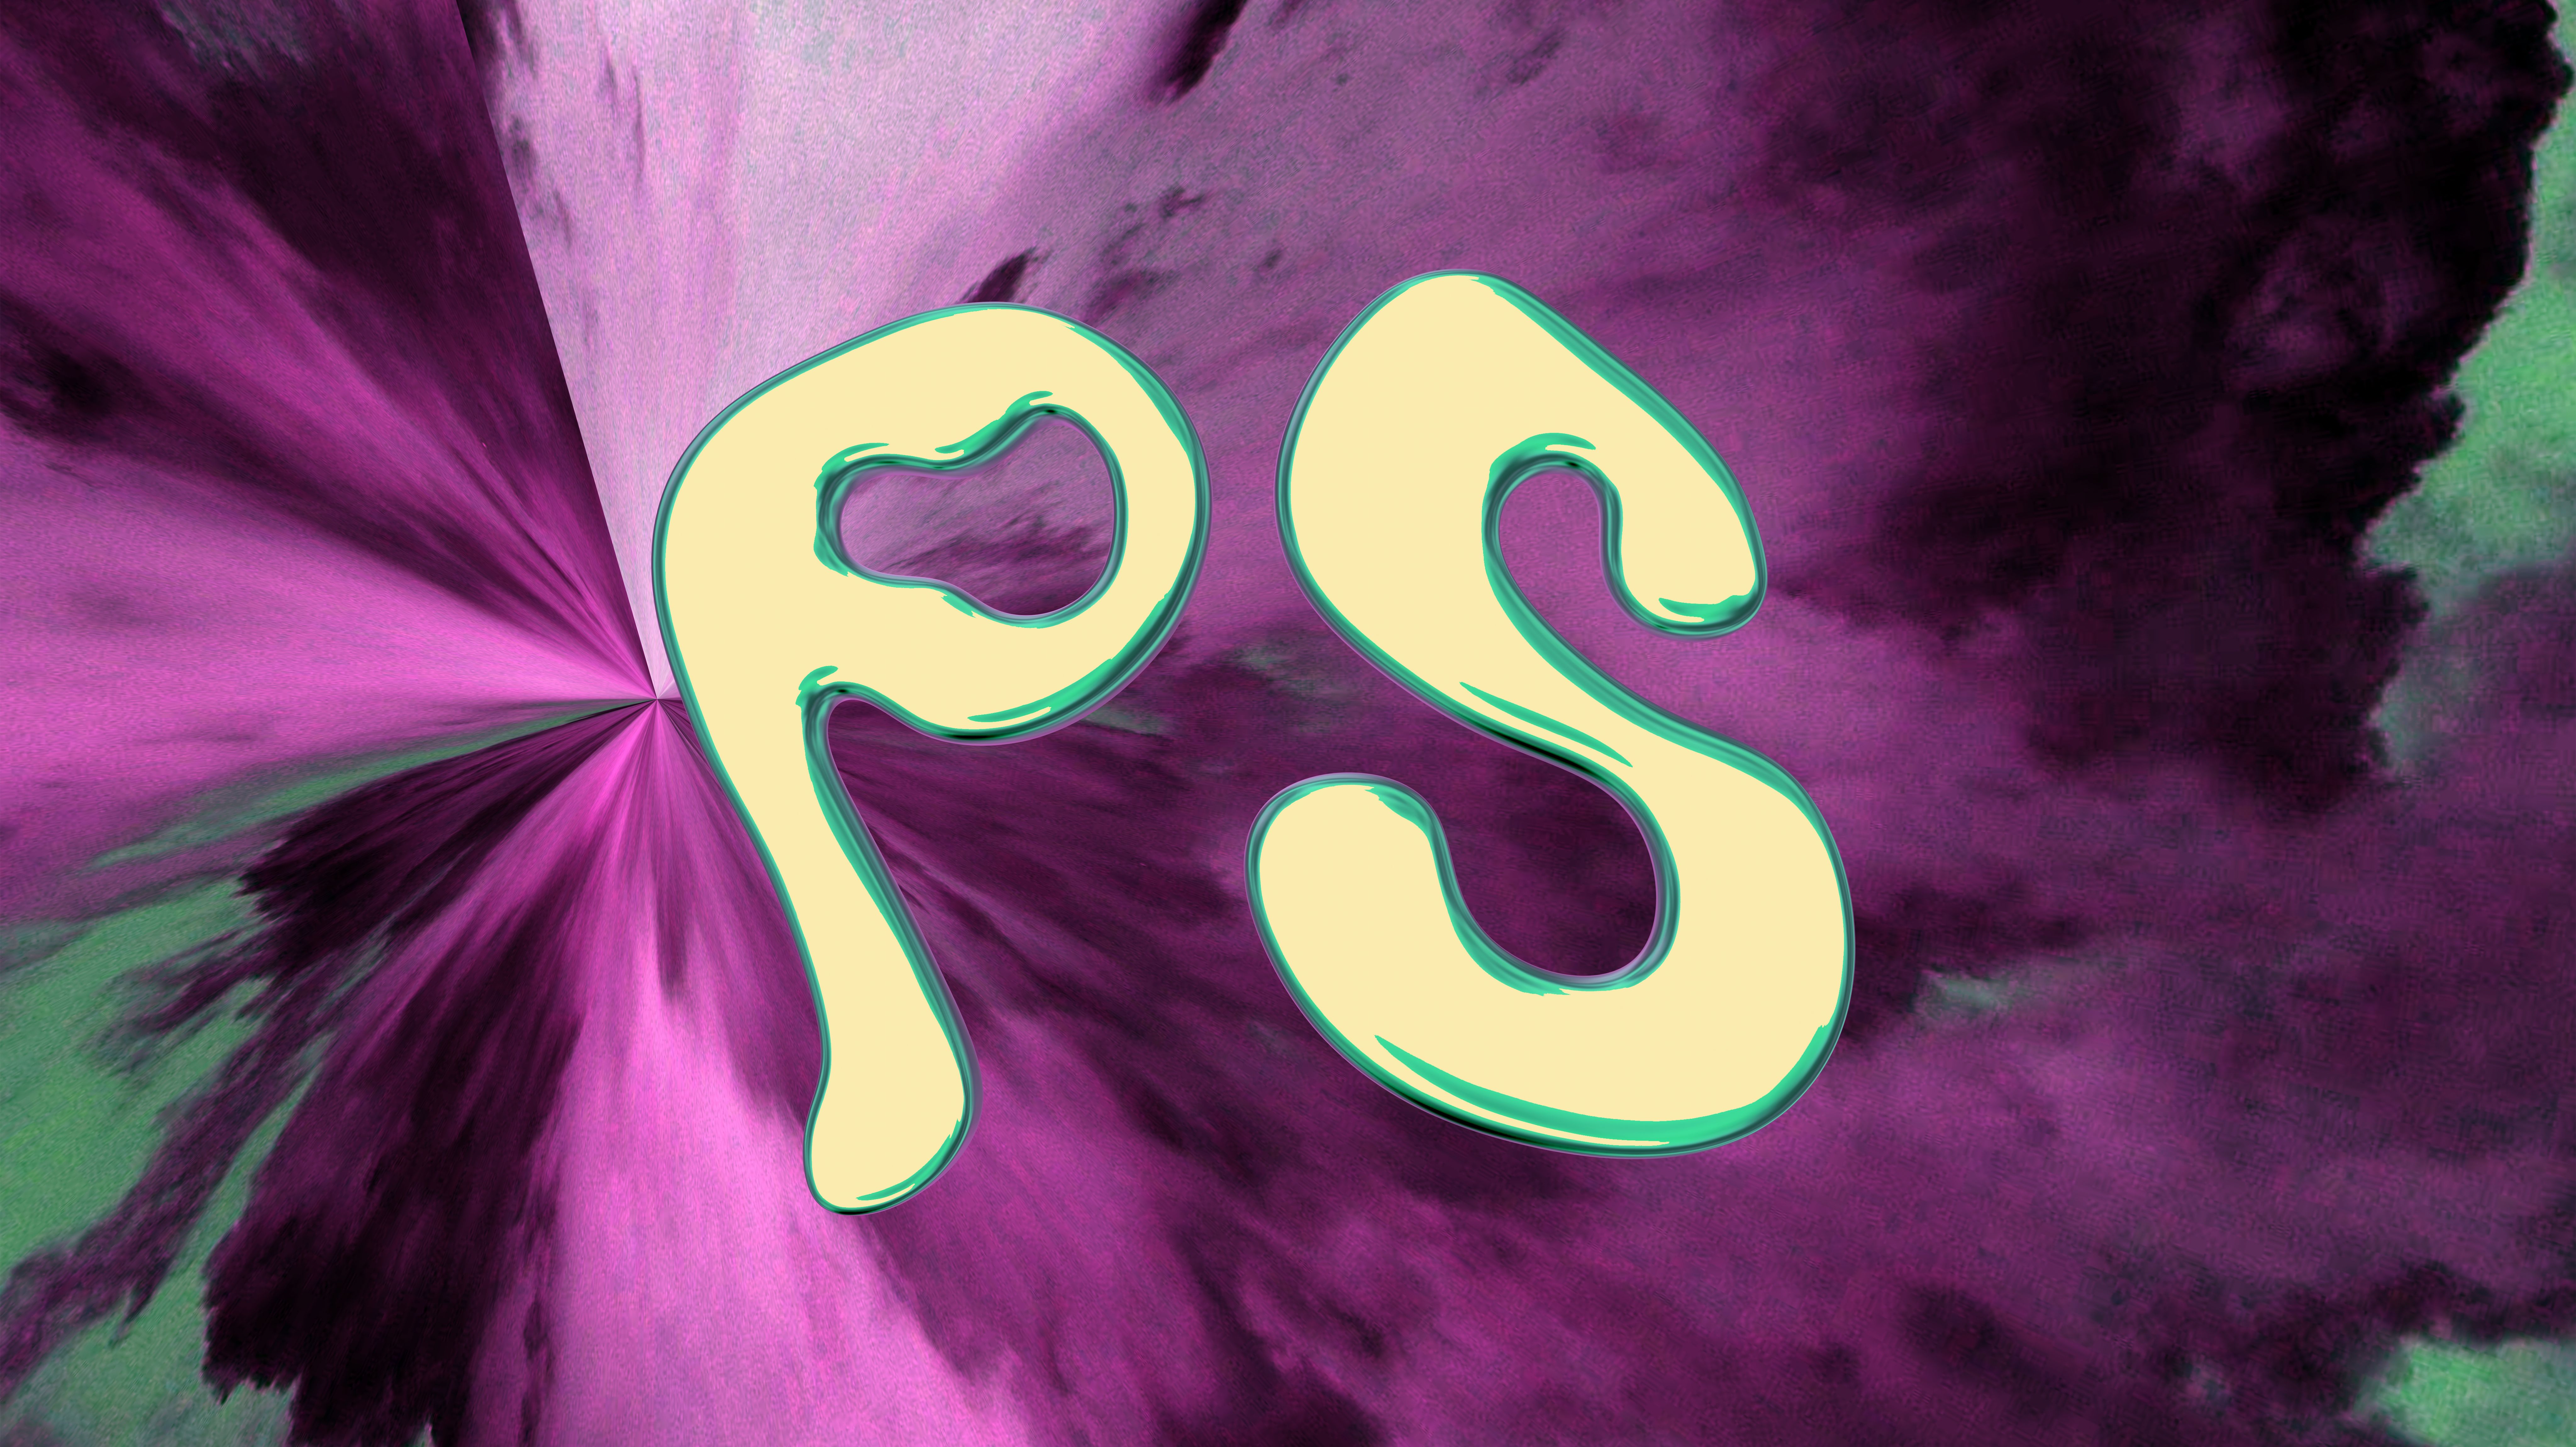 Image of the letters P and S in yellow, outlined in green, on a swirly purple and green background.